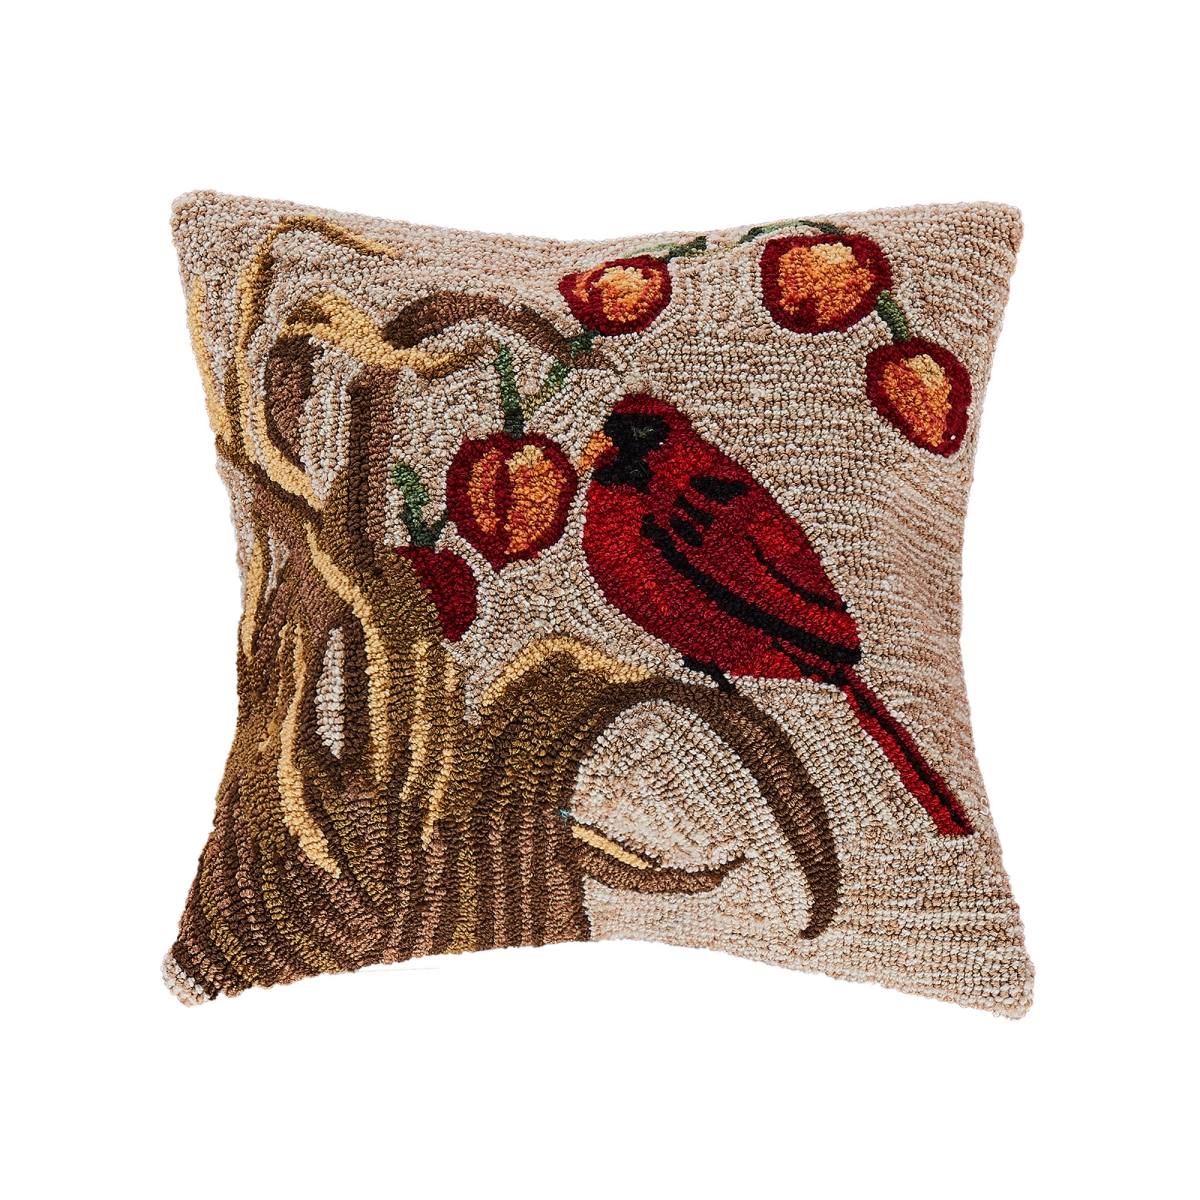 Trans-ocean Imports 7fp8s439412 18 In. Square Liora Manne Frontporch Bird Indoor & Outdoor Hand Tufted Pillow - Neutral